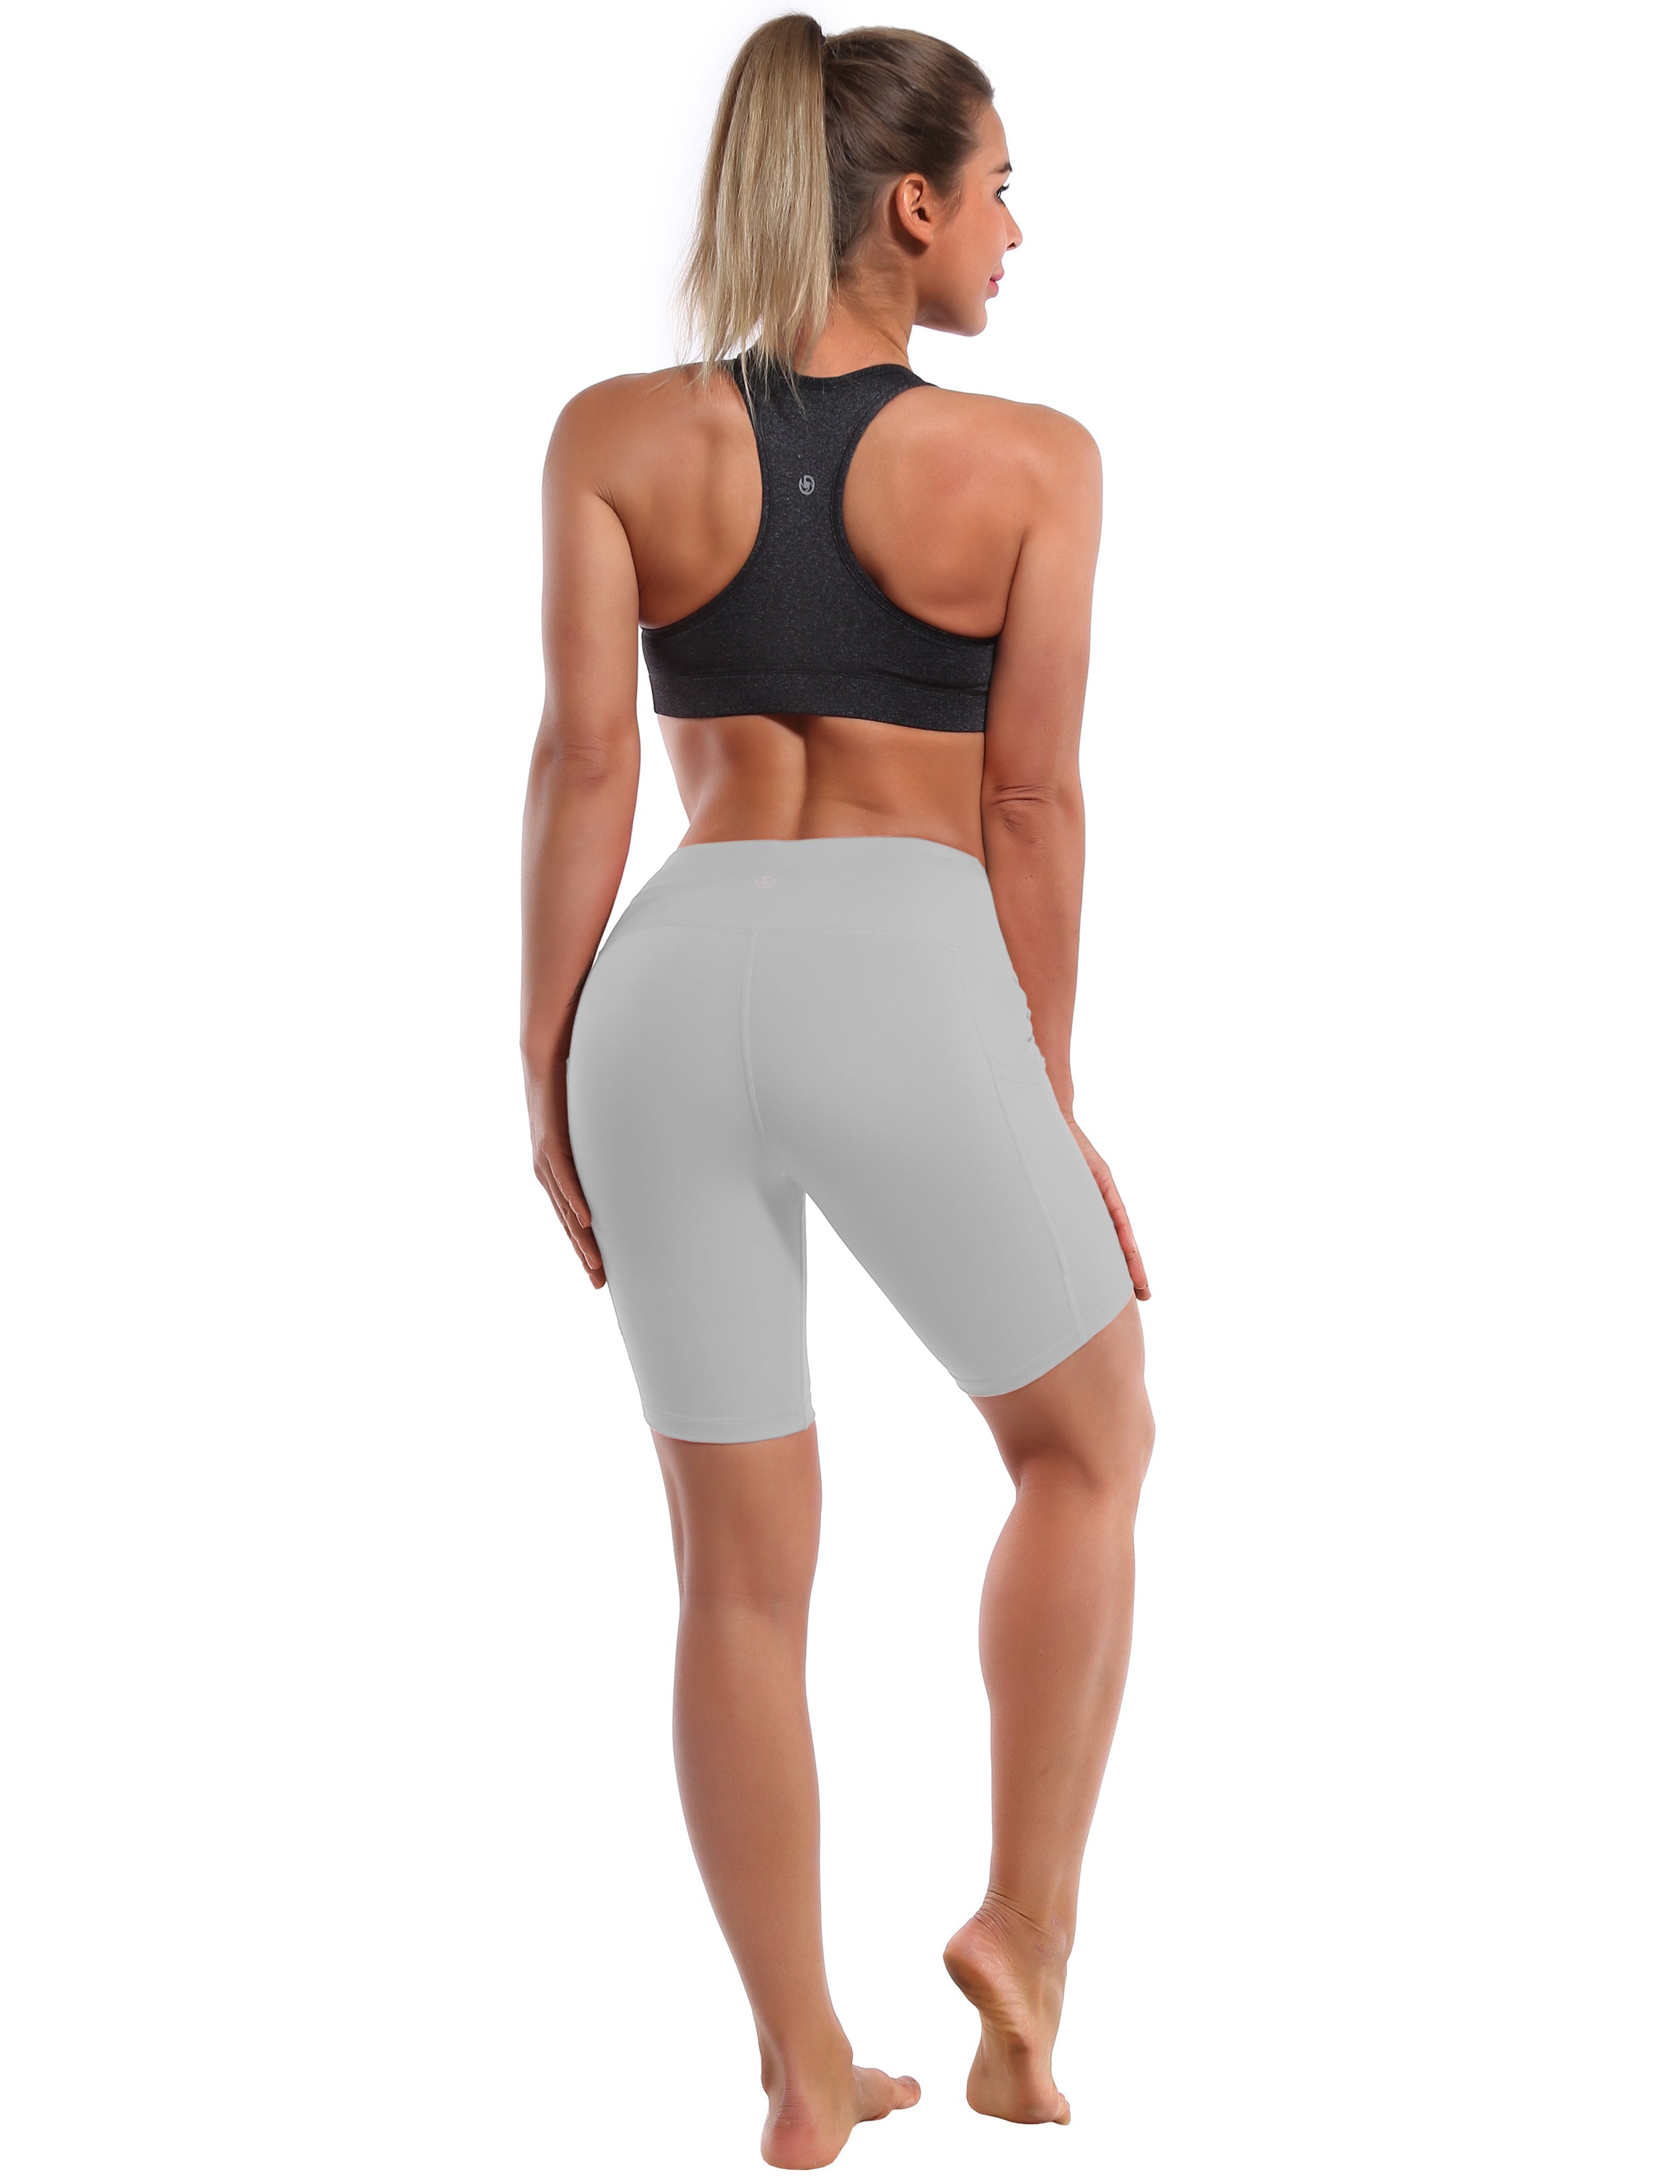 8" Side Pockets Biking Shorts lightgray Sleek, soft, smooth and totally comfortable: our newest style is here. Softest-ever fabric High elasticity High density 4-way stretch Fabric doesn't attract lint easily No see-through Moisture-wicking Machine wash 75% Nylon, 25% Spandex